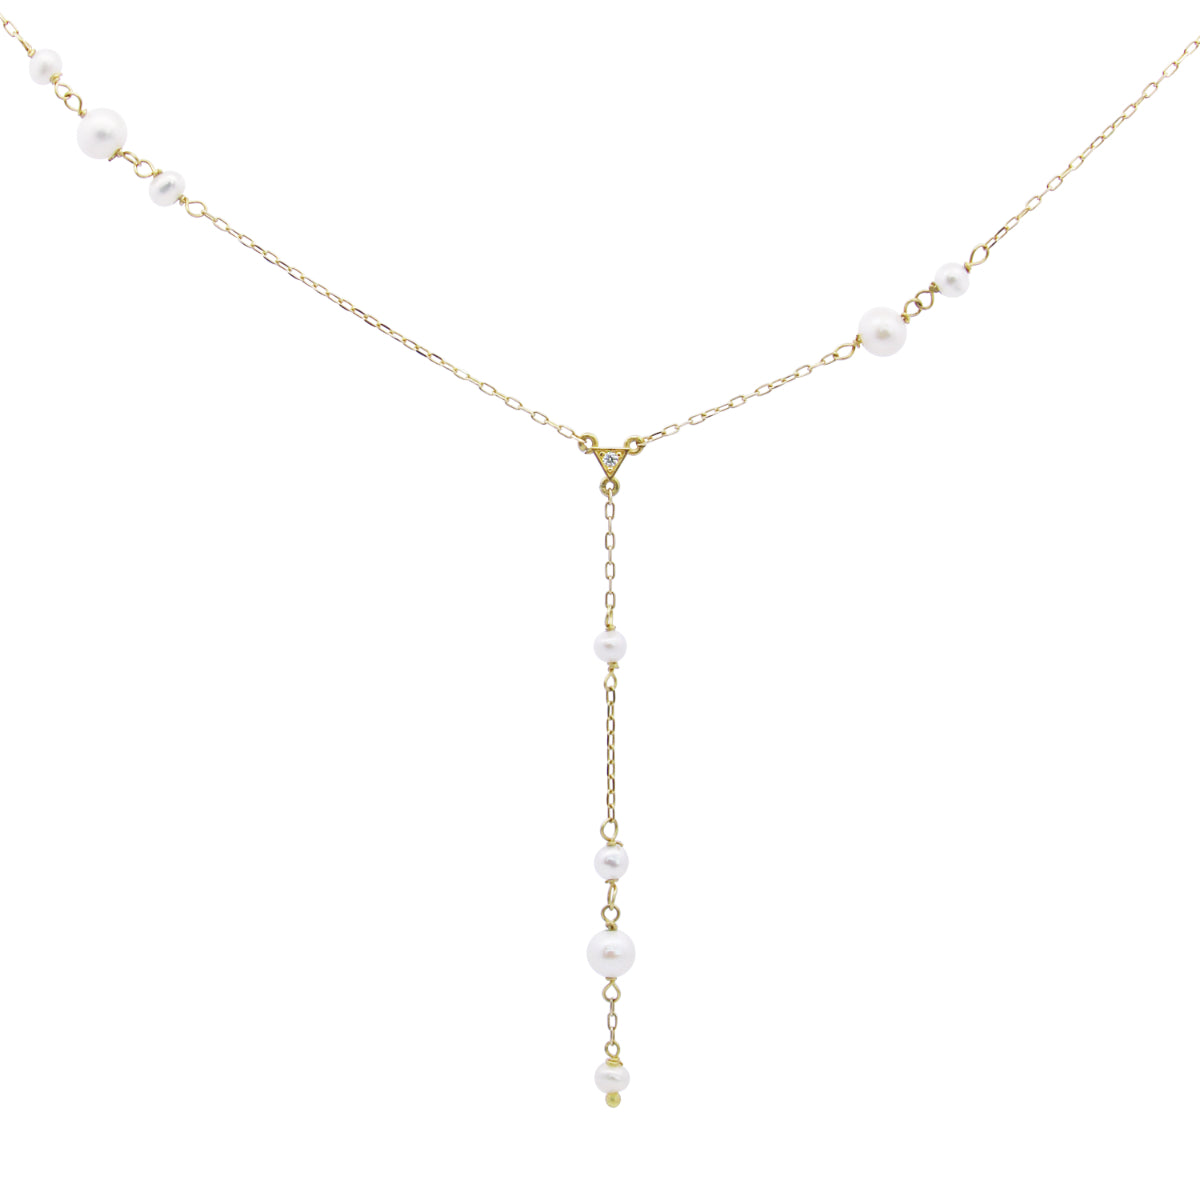 Chokers - Gold rosary necklace with small pearl - ORO18KT - 1 | Rue des Mille